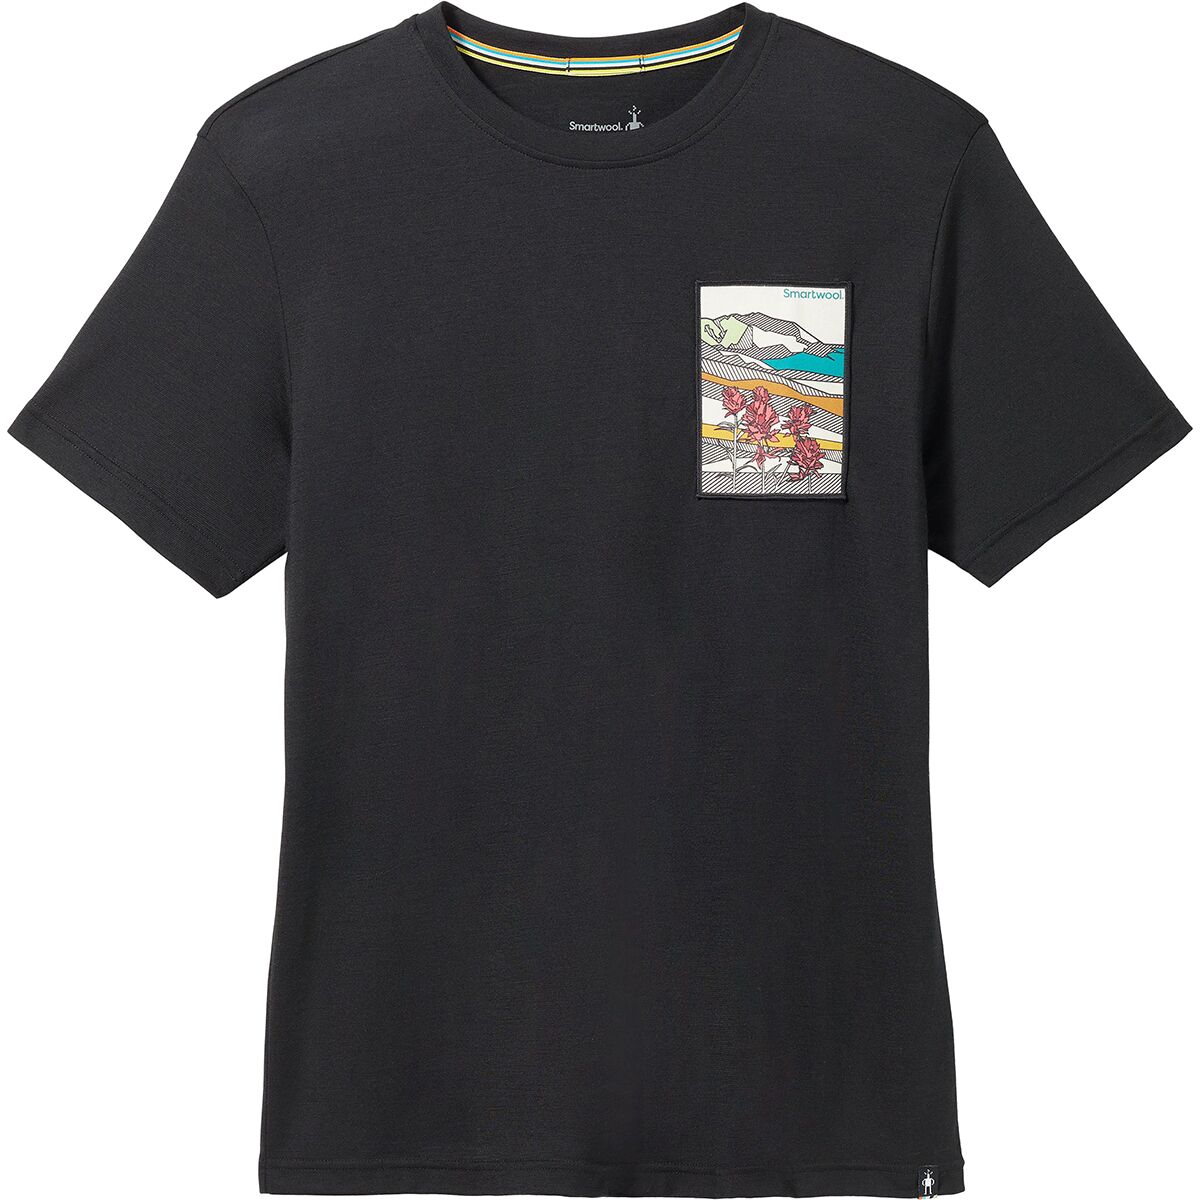 Smartwool Mountain Patch Graphic T-Shirt - Clothing